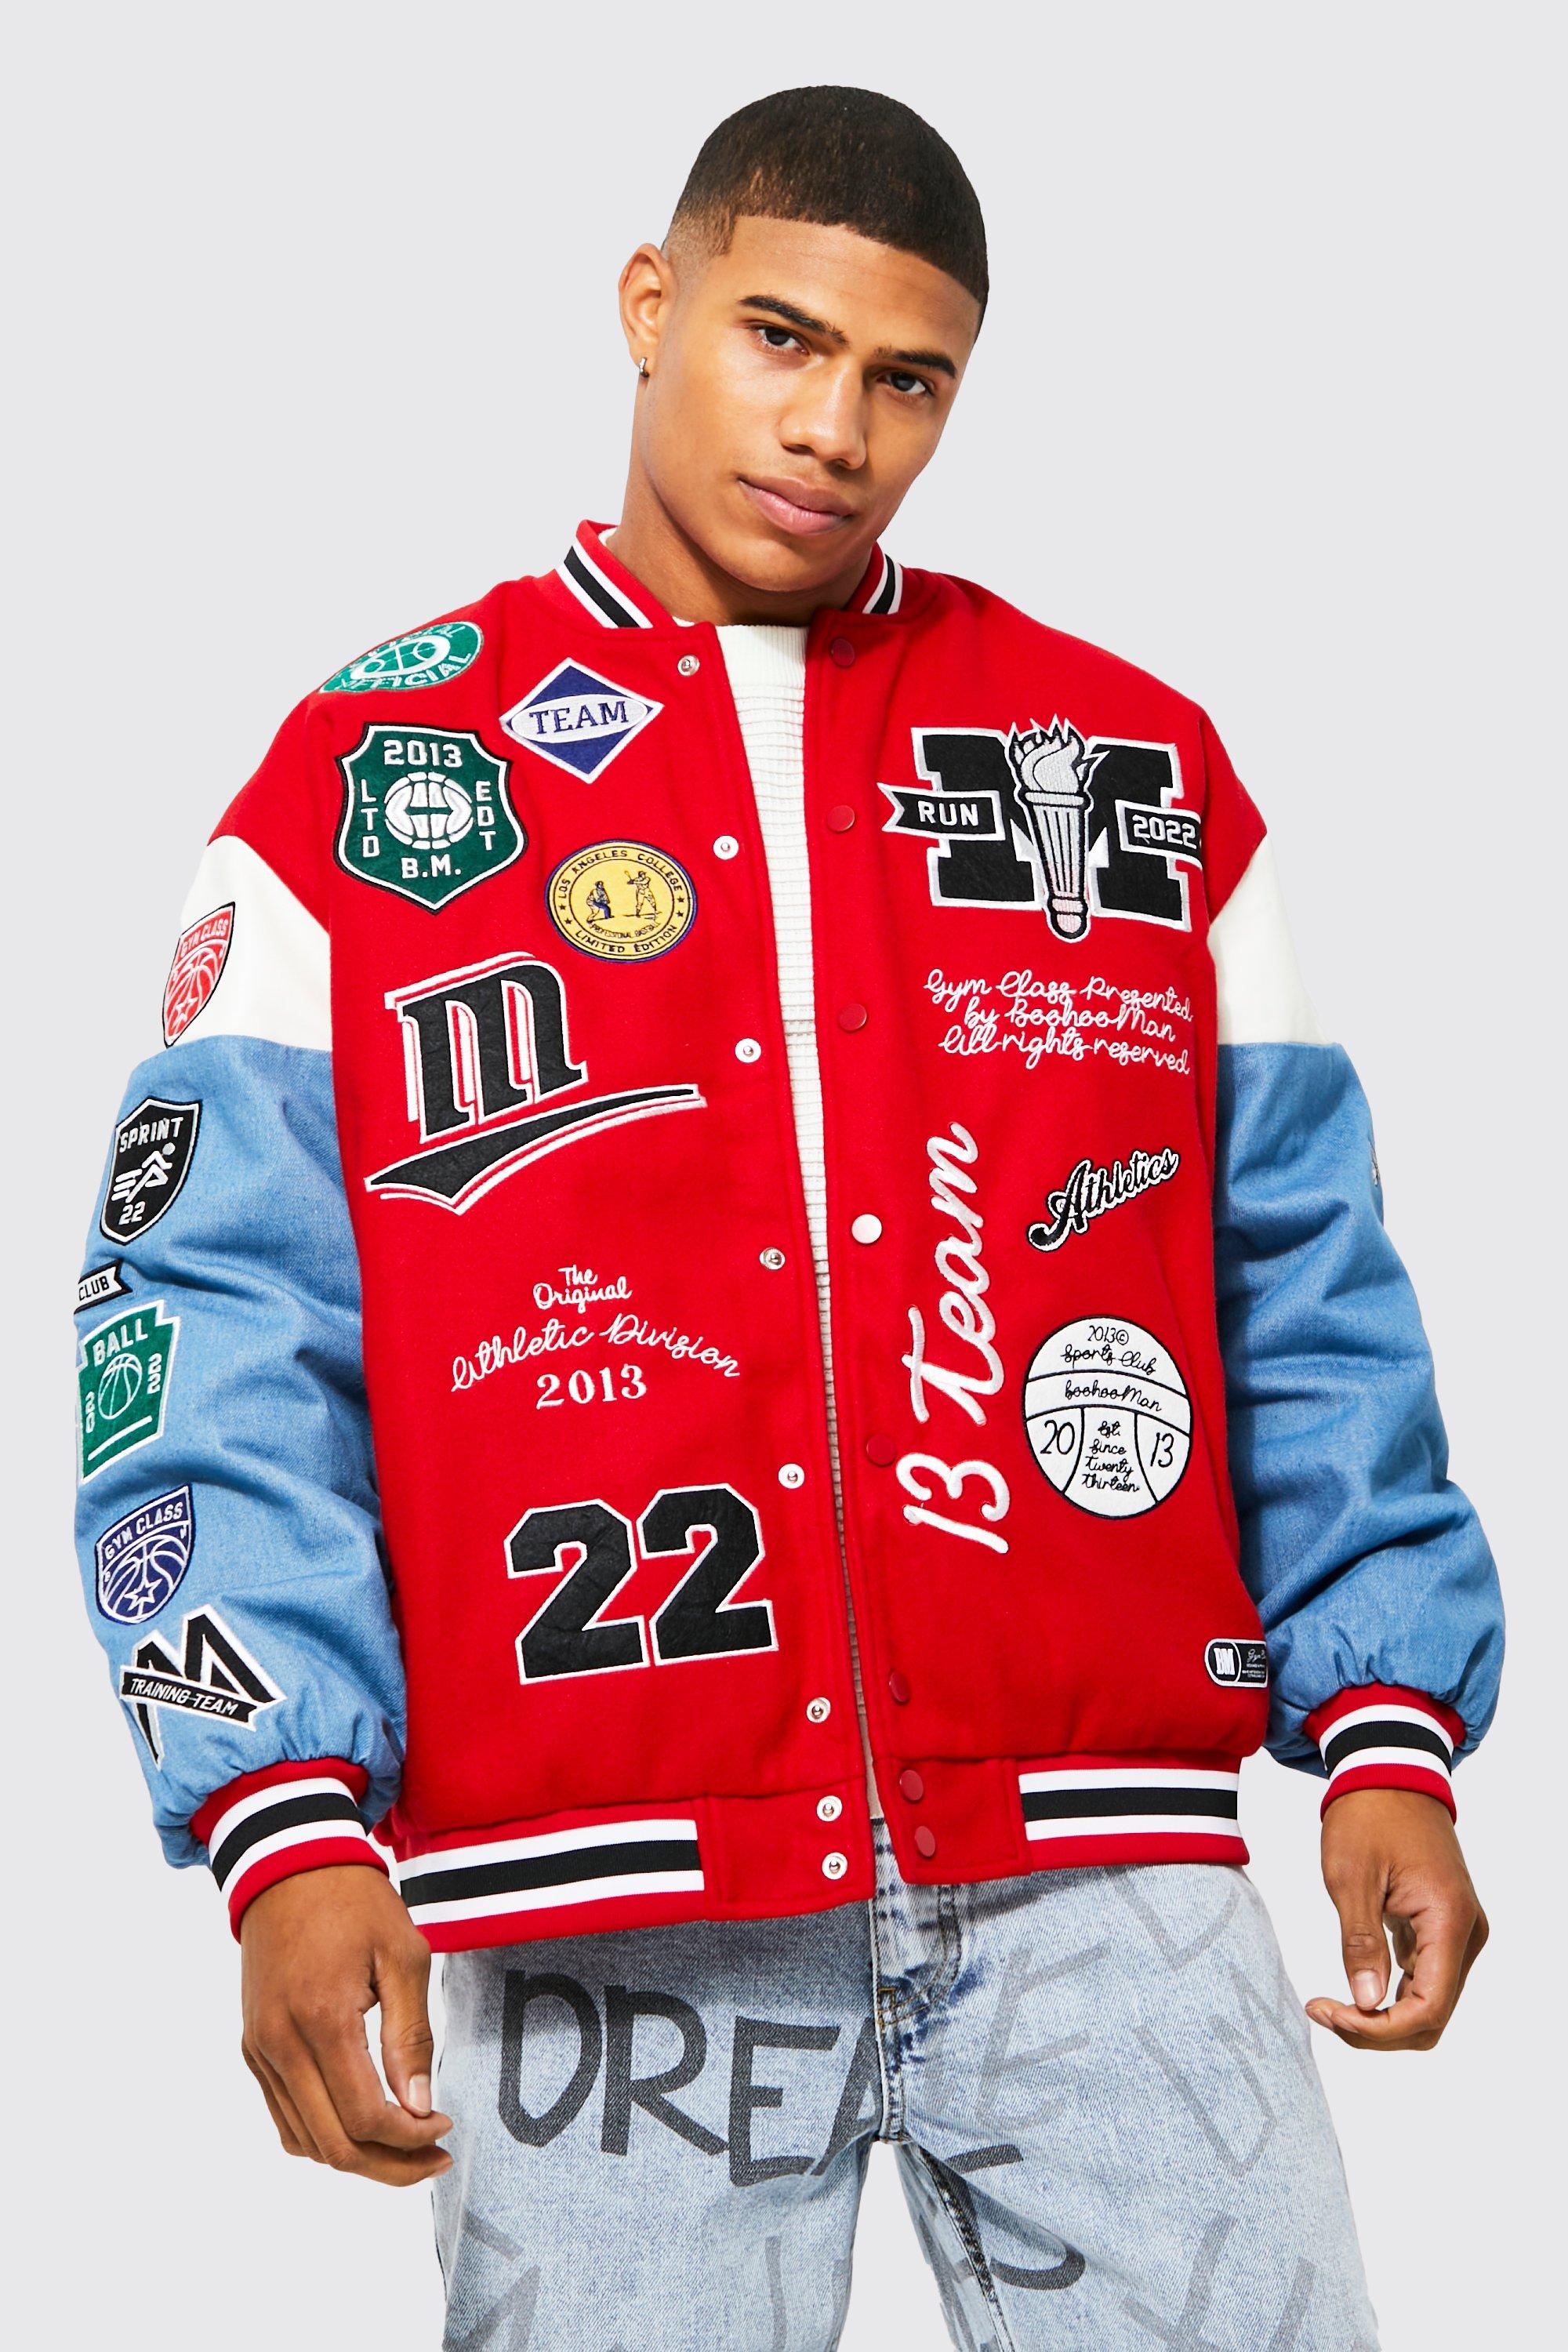 ASOS DESIGN oversized varsity jacket in red with badges